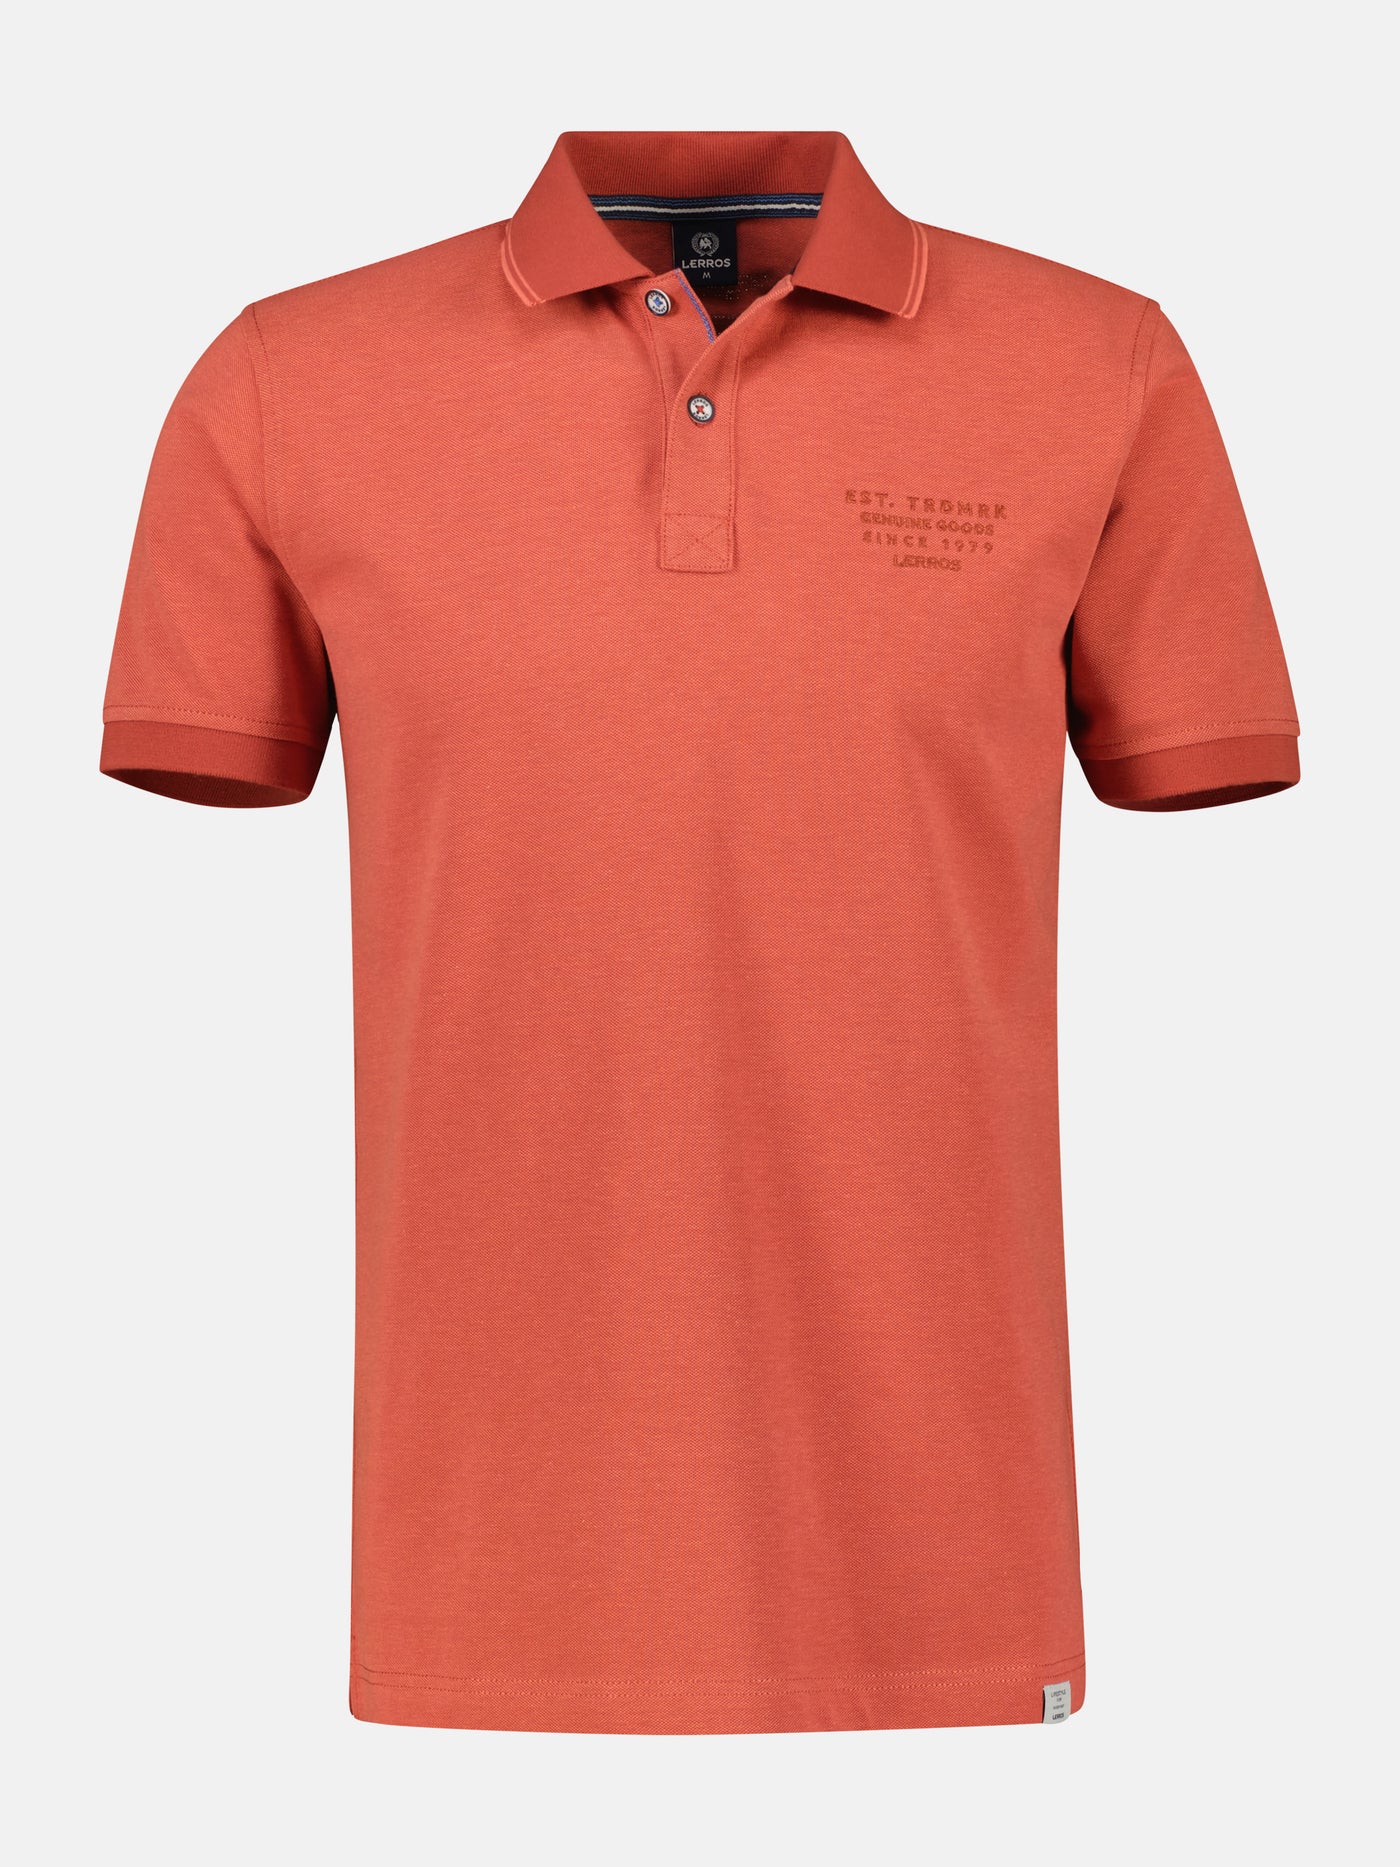 Polo shirt in a melange look